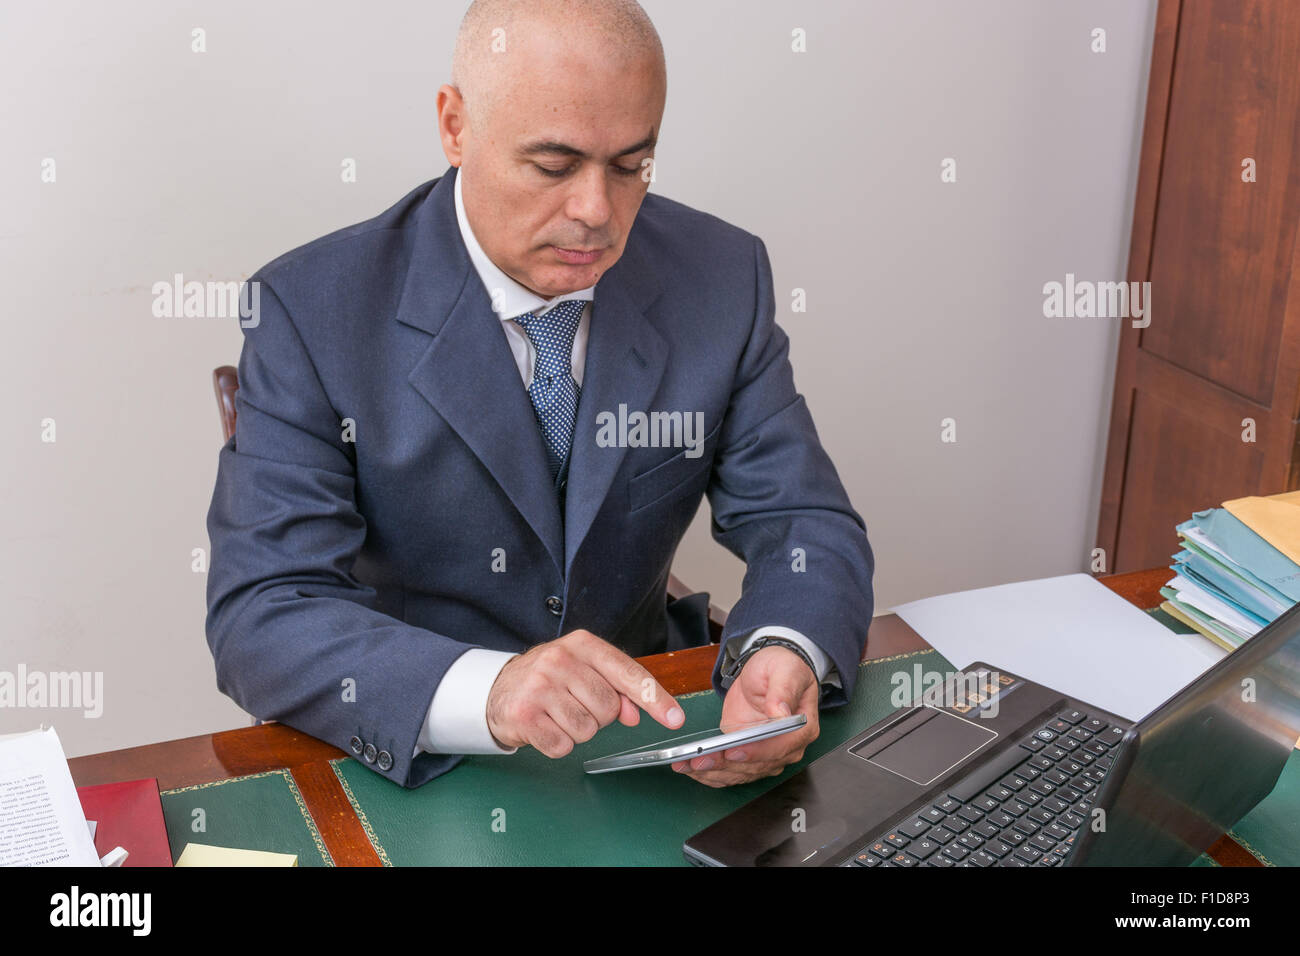 business man at desk, contemplating your i pad/tablet, in his professional office. Stock Photo